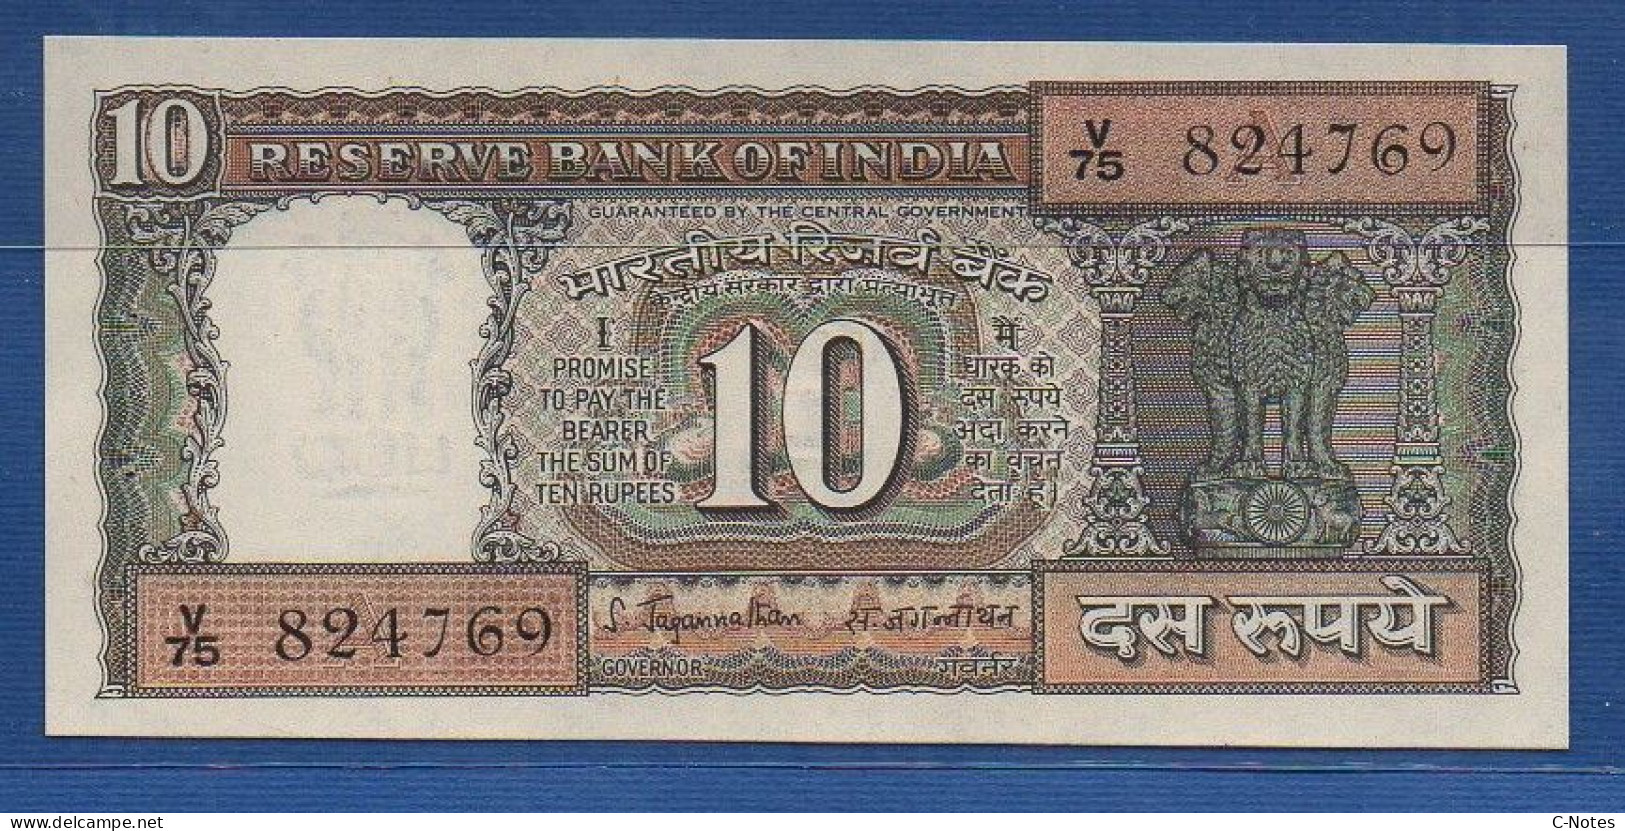 INDIA - P. 60a – 10 Rupees ND, UNC-,  Serie V75 824769 - Plate Letter A Signature: S. Jagannathan (1970) - India